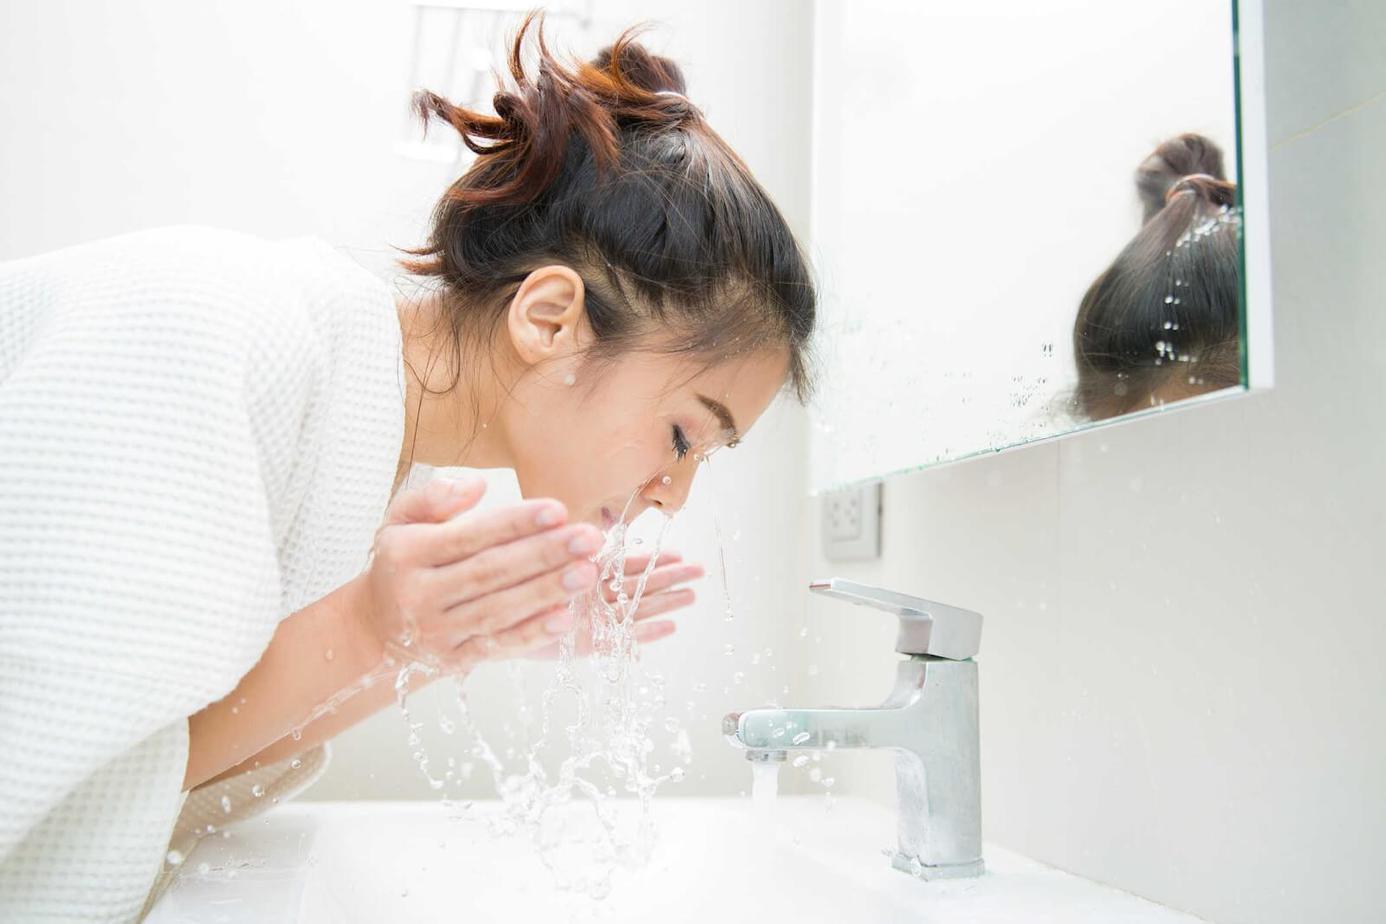 Washing Your Face Properly Is the First Step of Care for Beautiful Skin News